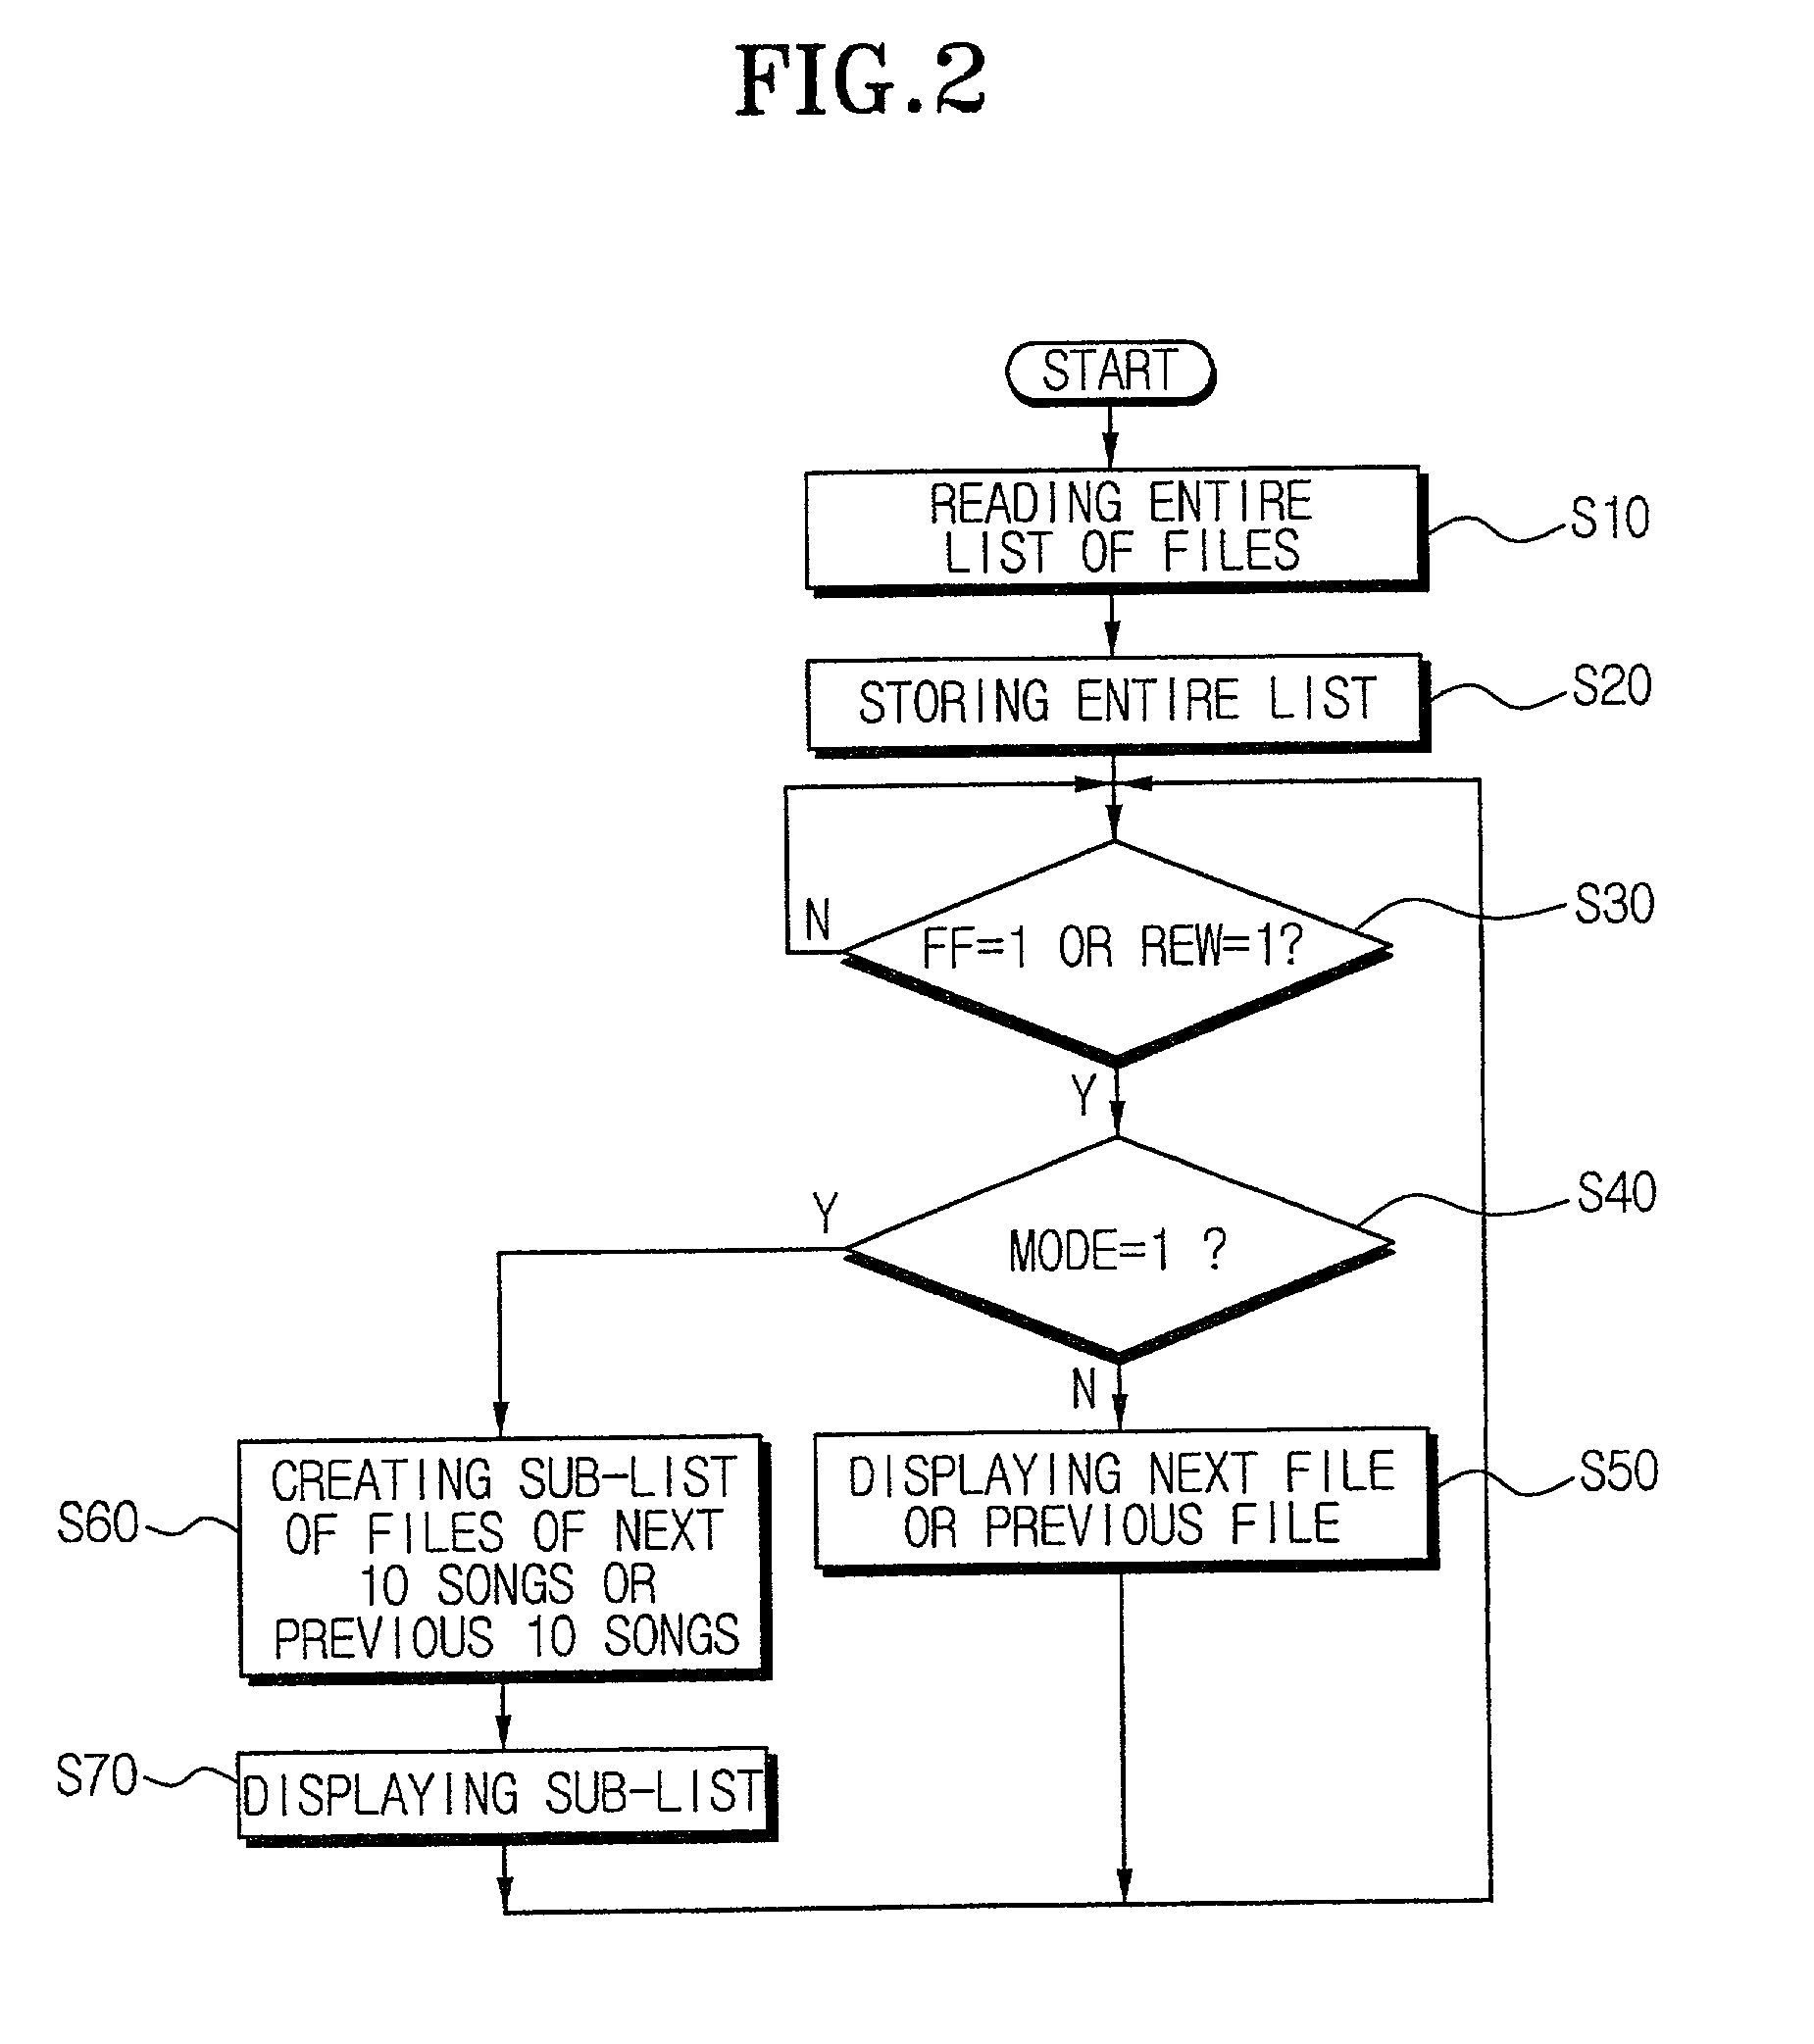 File list display apparatus capable of successively displaying sub-list